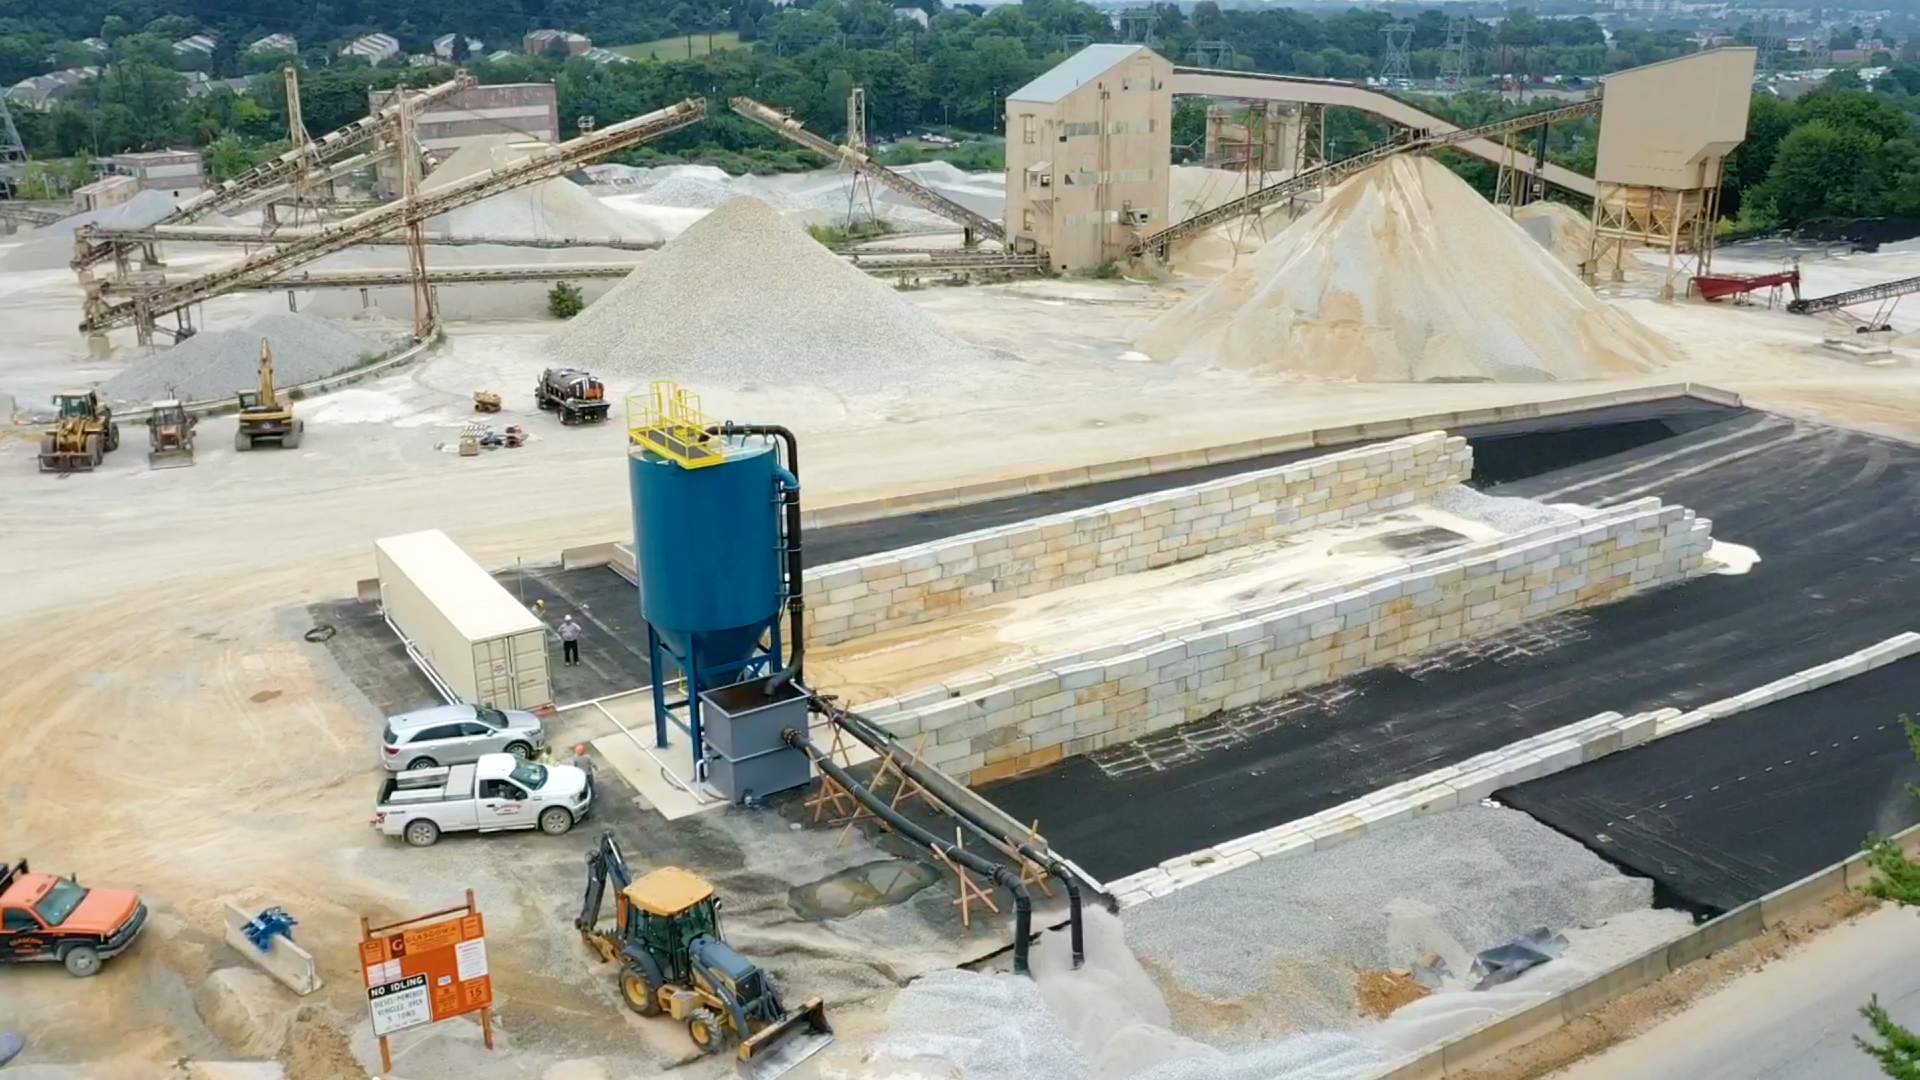 An aggregate production site with gravel piles, a clarifier and mud cells.